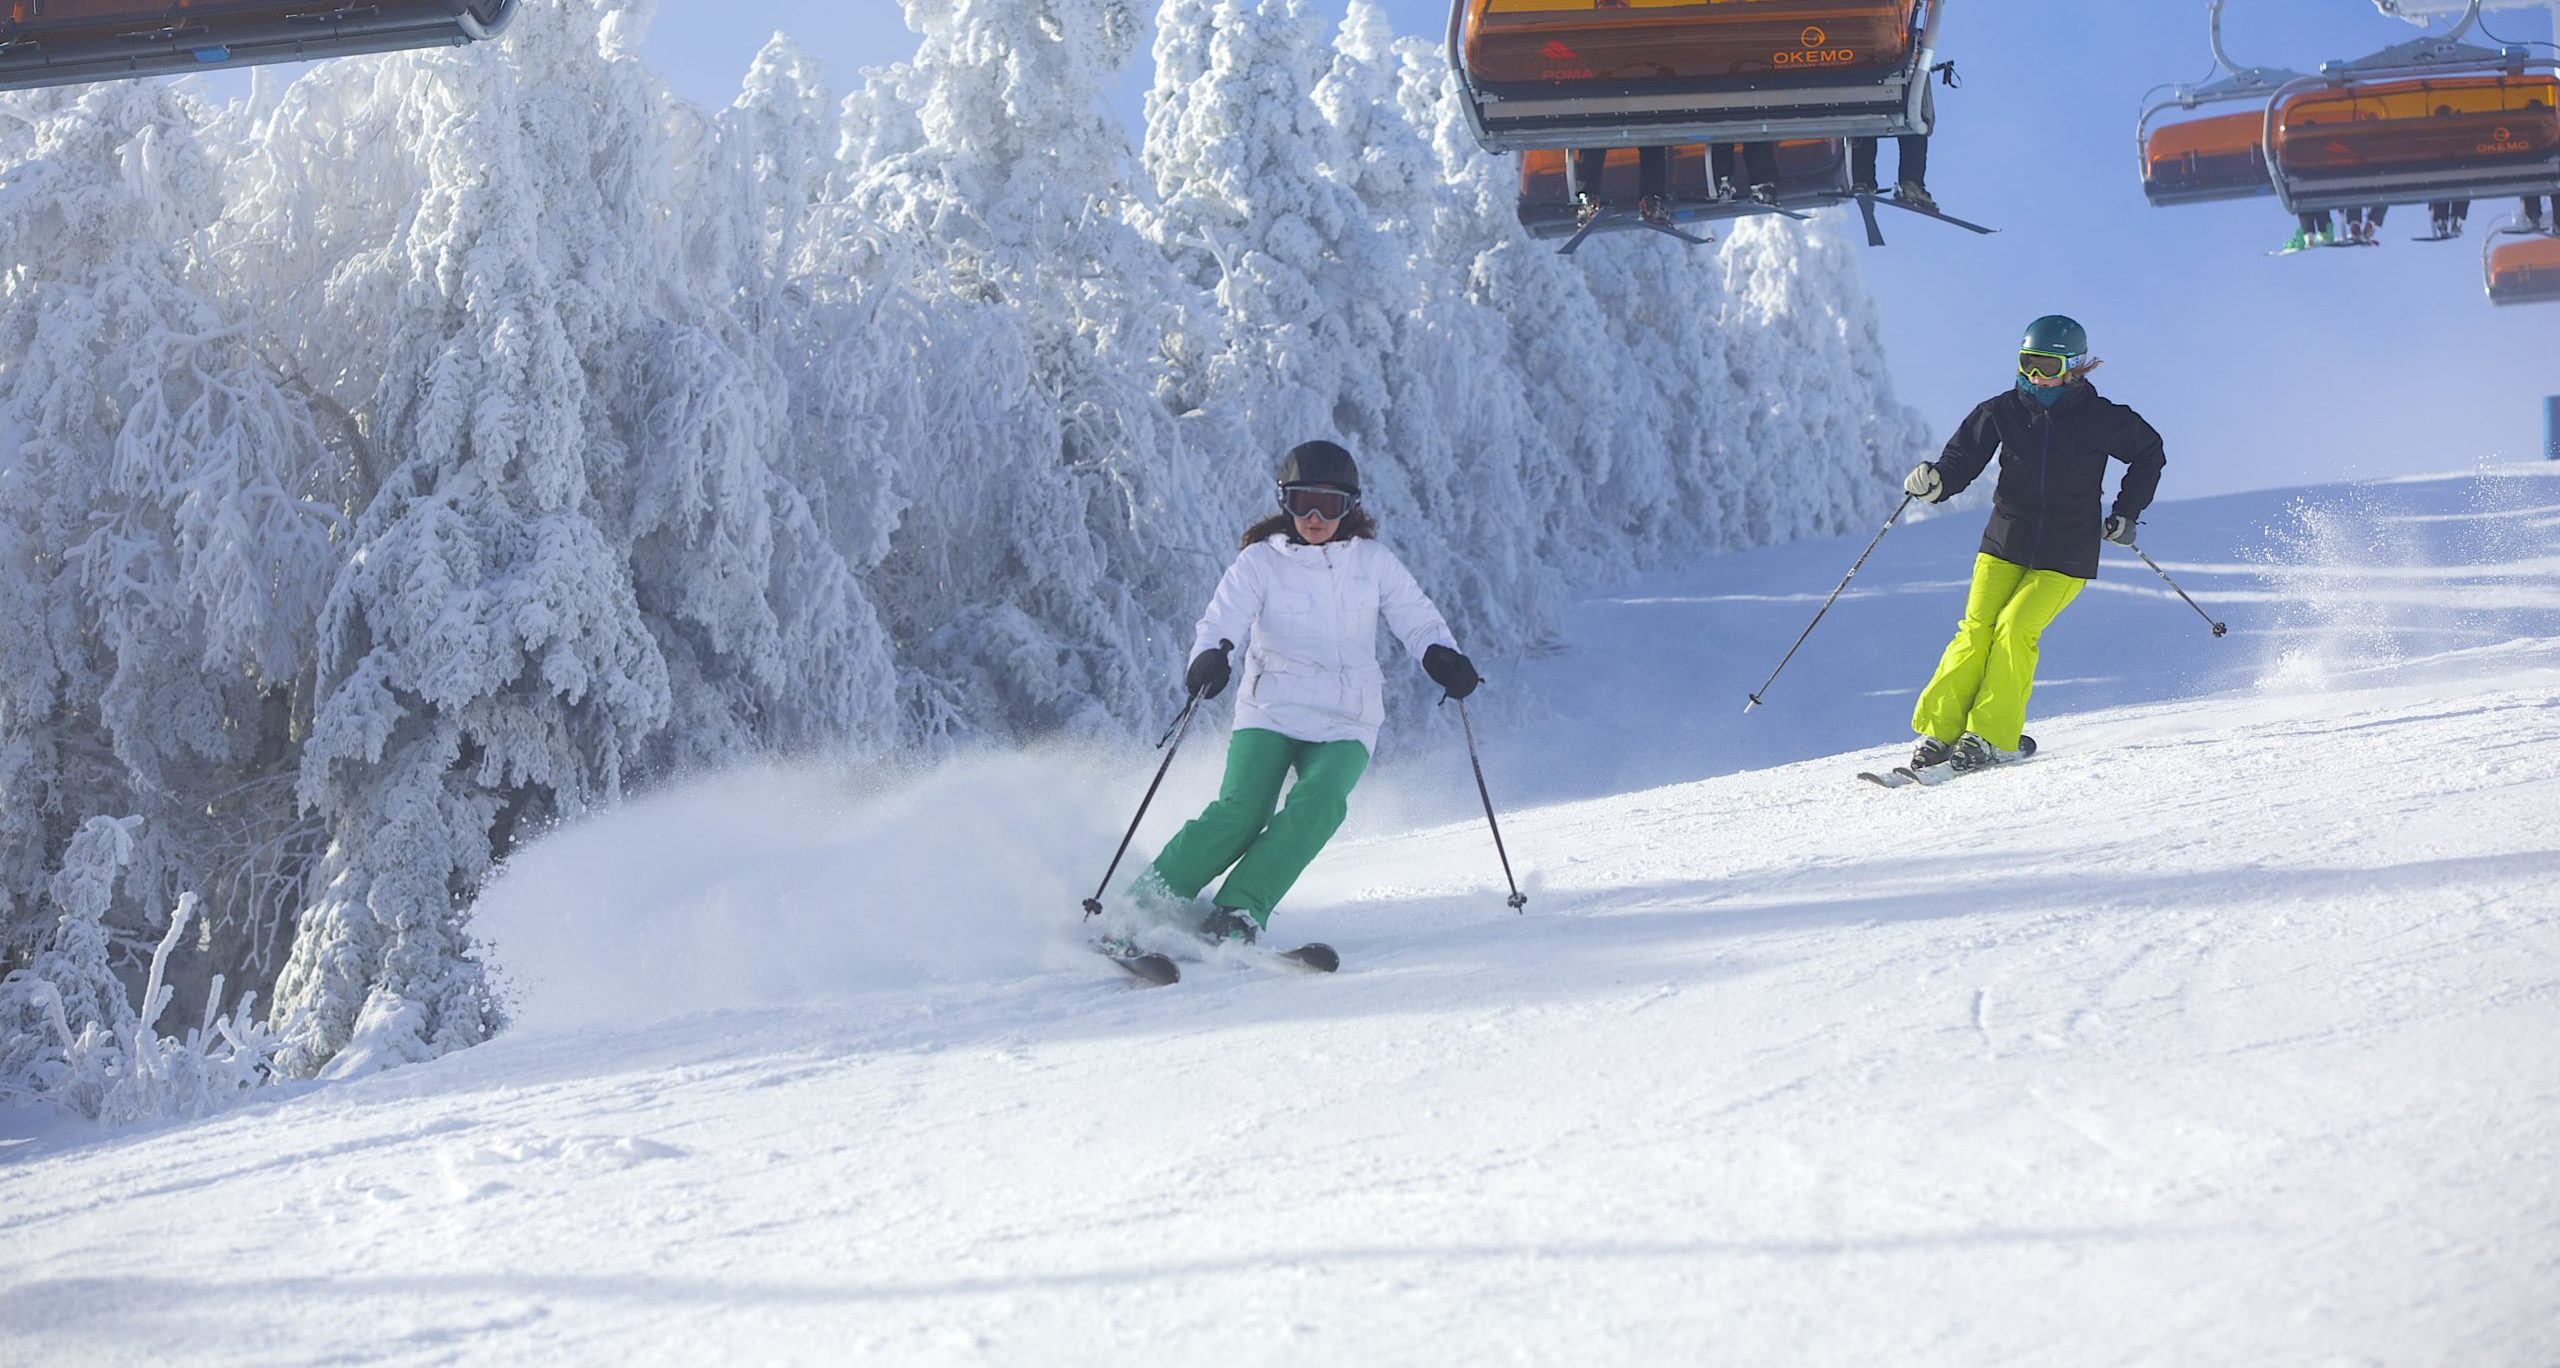 Okemo Mountain AllInclusive Packages by Endless Turns